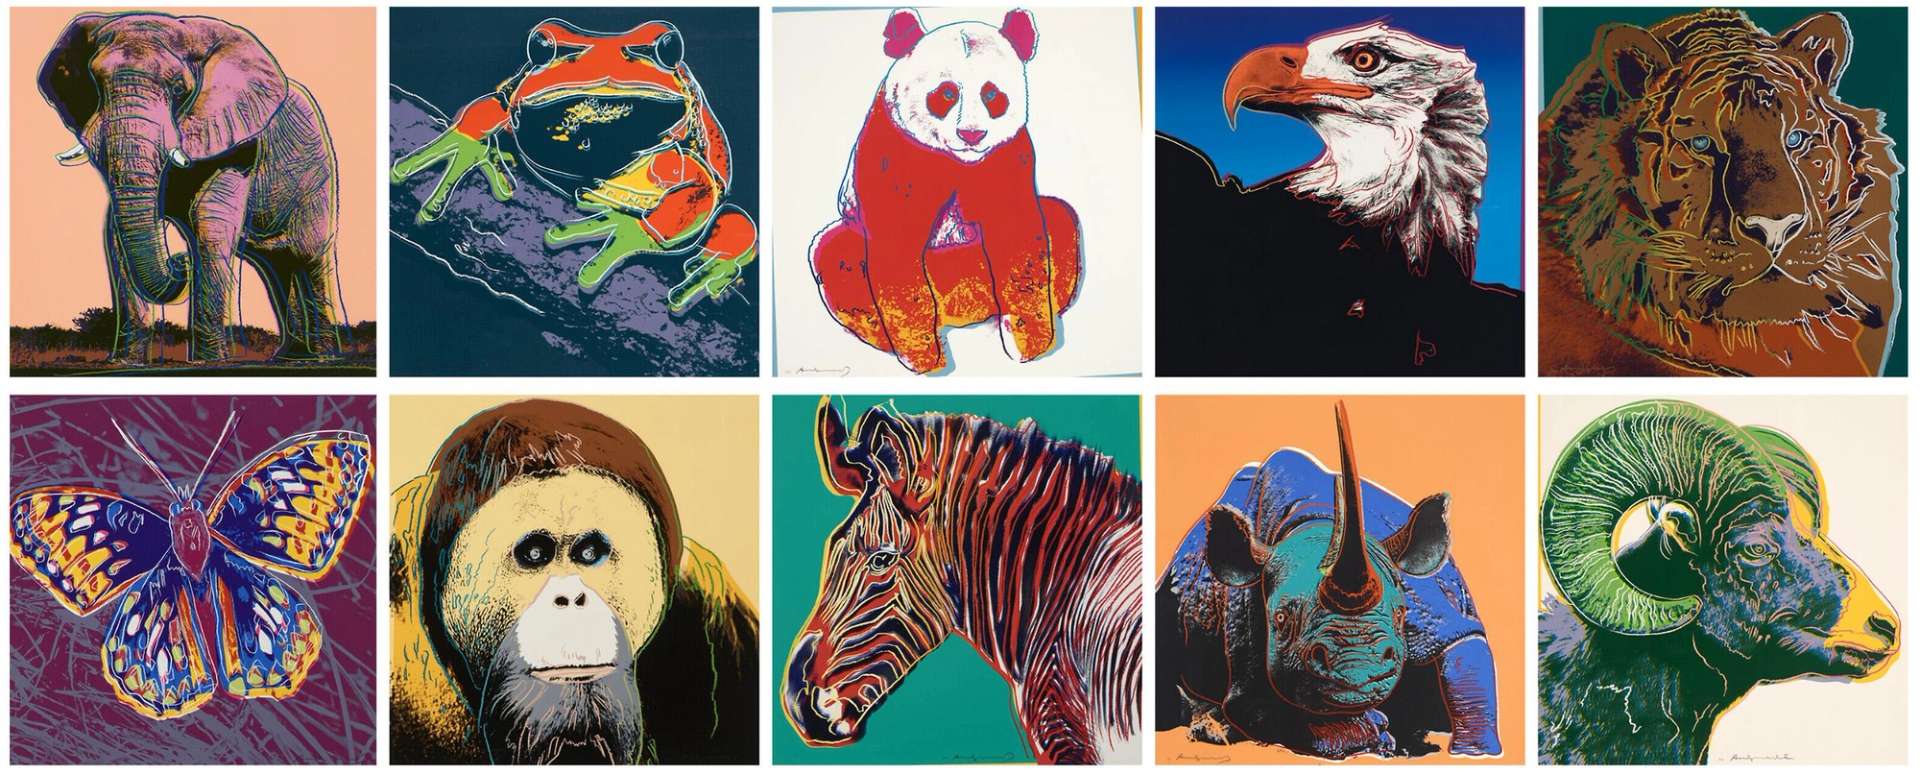 A complete set of 10 Andy Warhol screenprints depicting endangered animals in his signature graphic style with bold, unnatural colours.